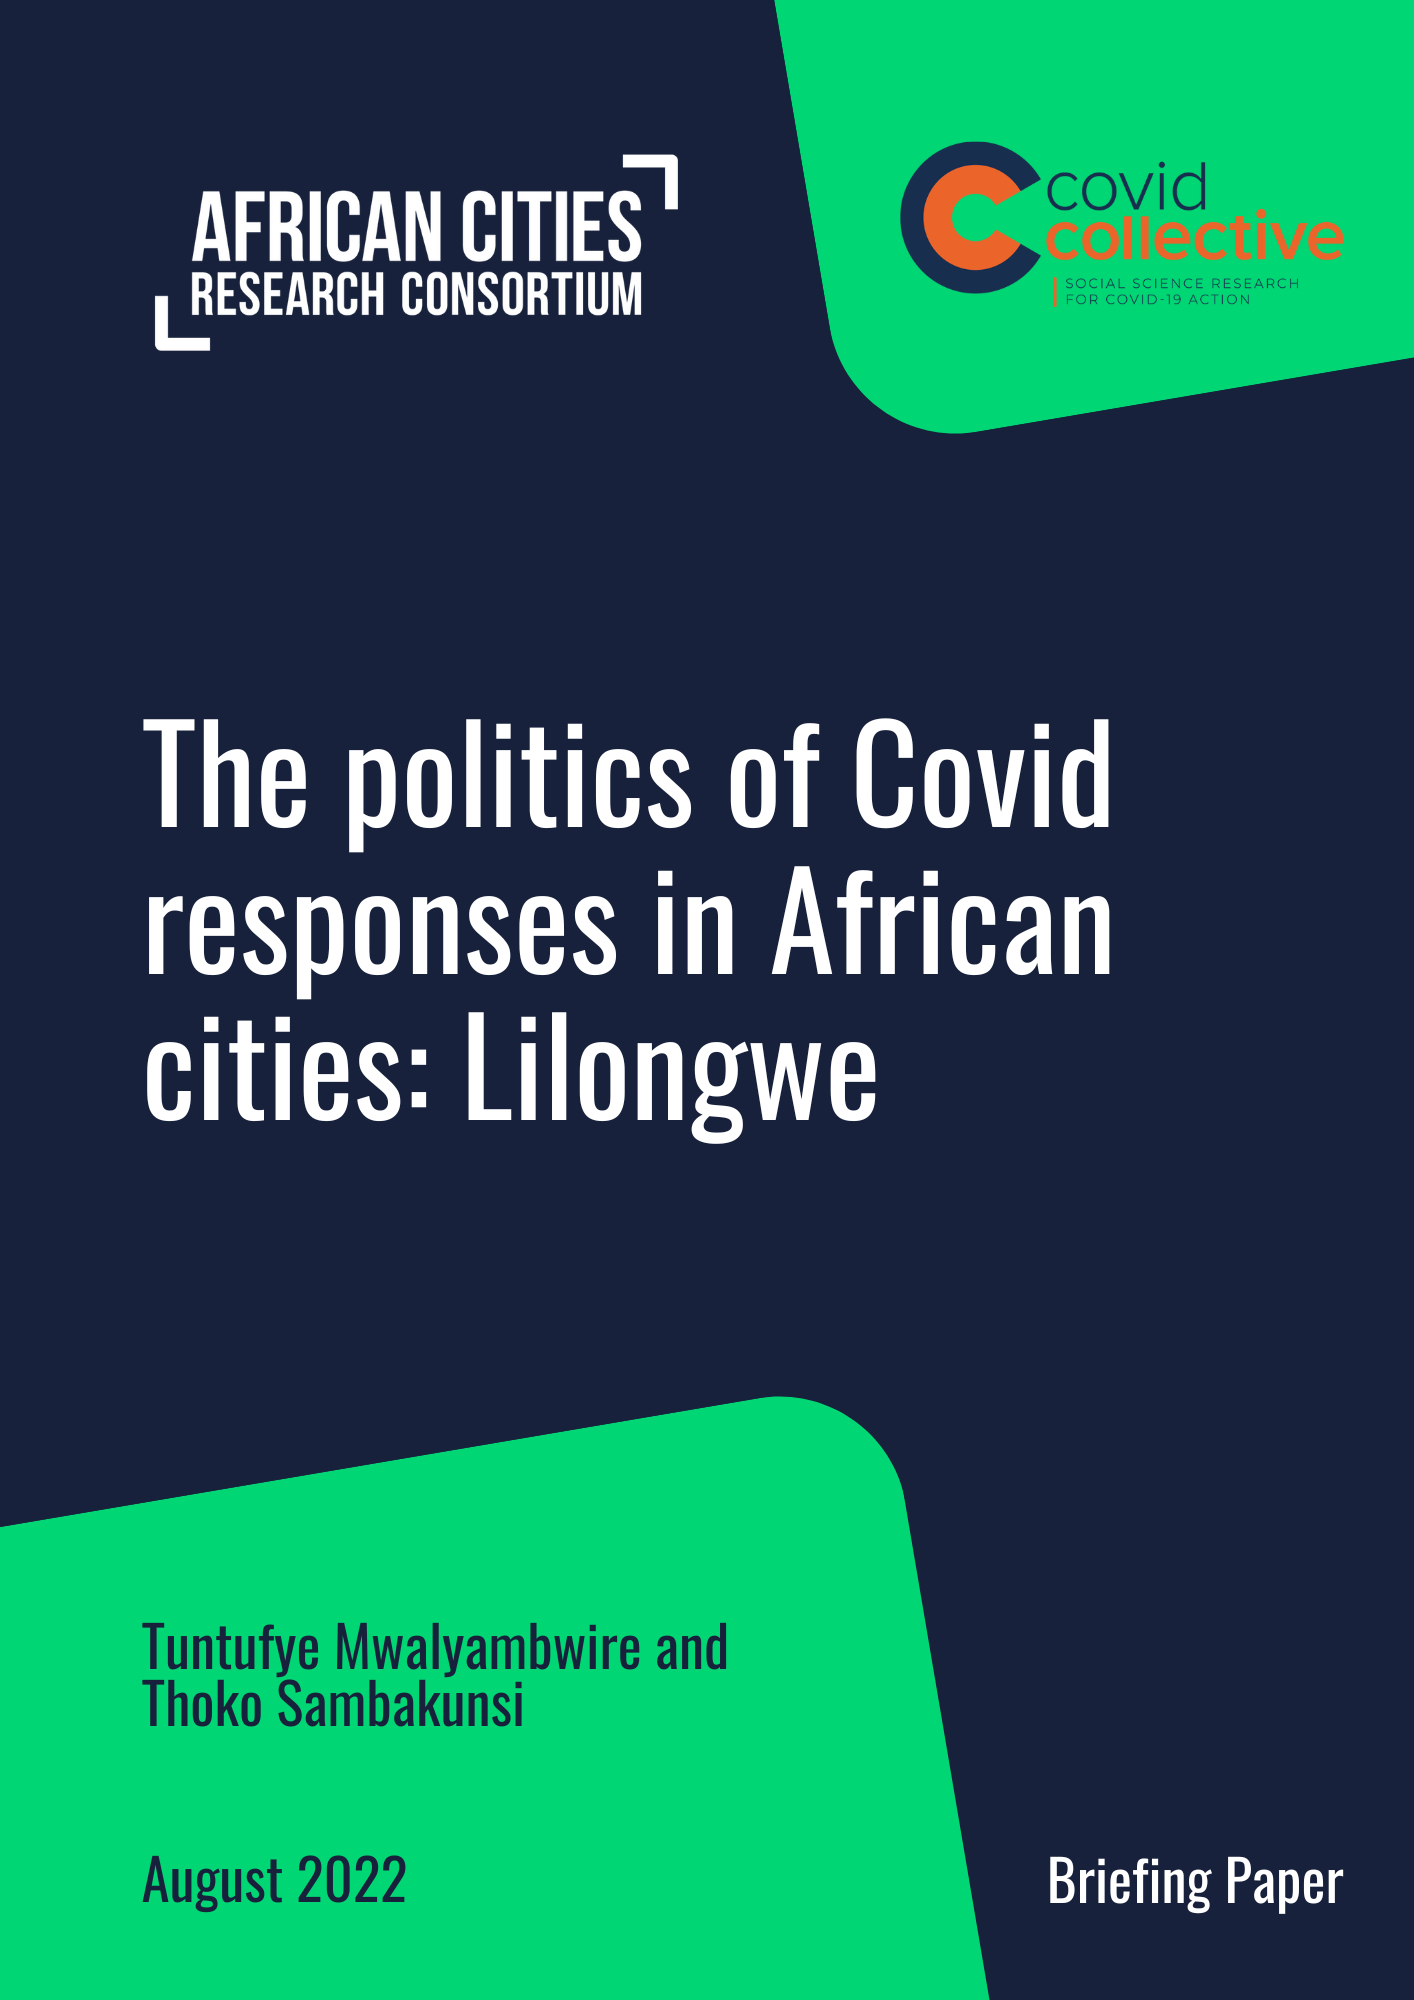 The politics of Covid responses in African cities: Lilongwe